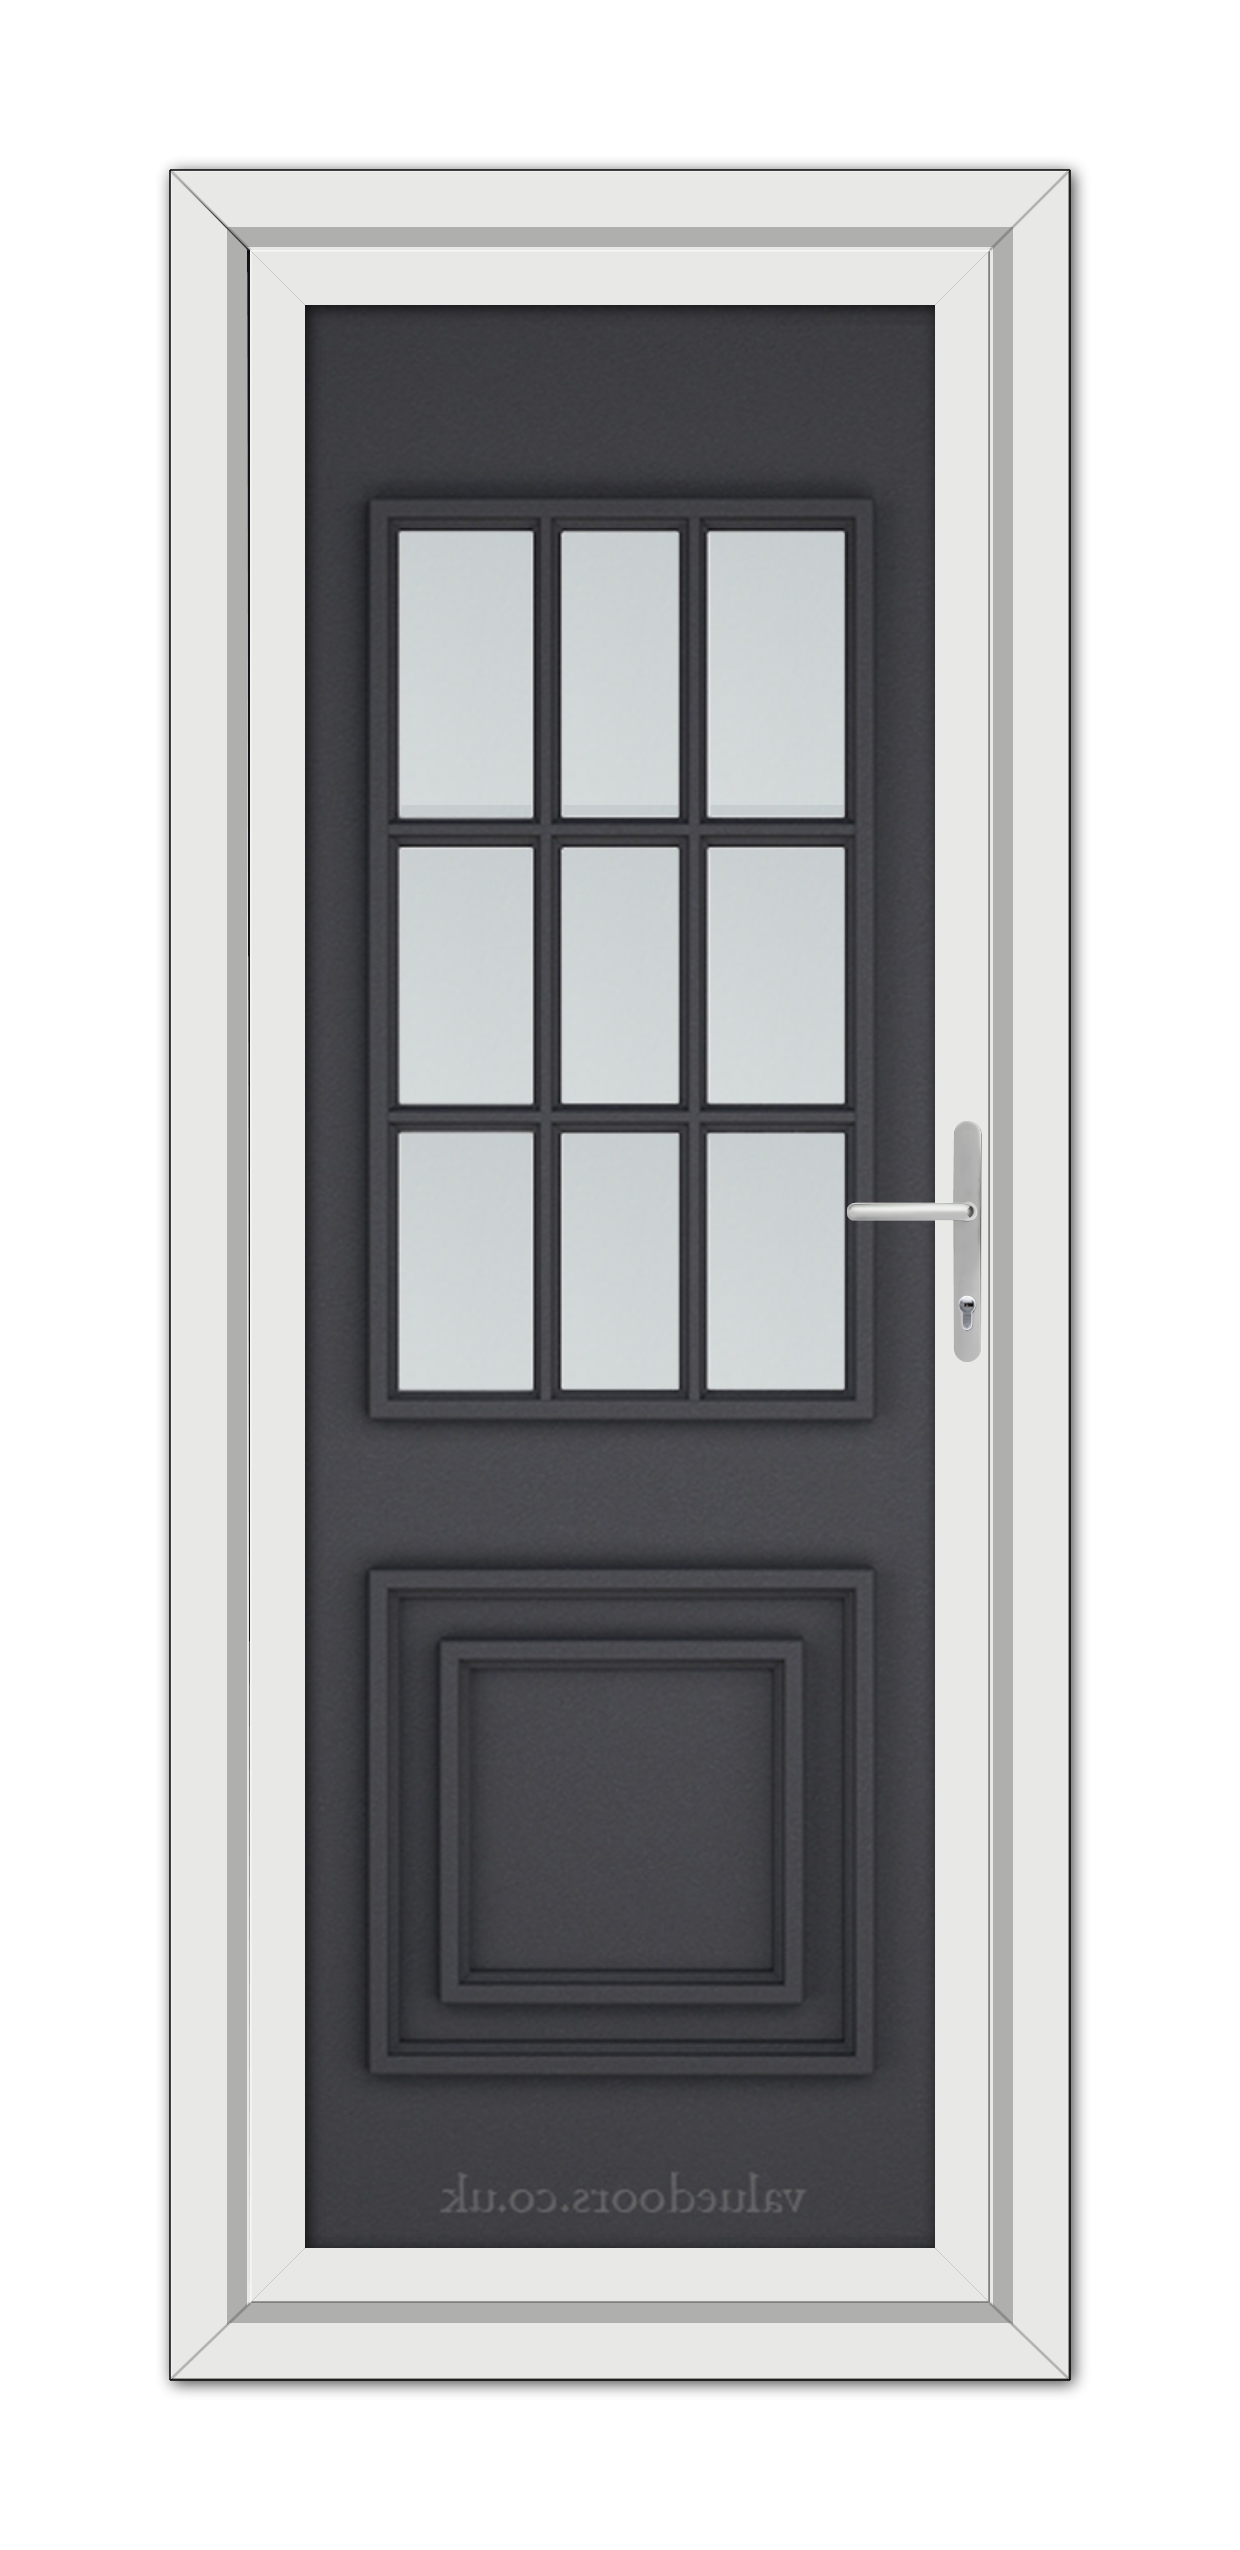 A modern Grey Grained Cambridge One uPVC Door featuring a vertical alignment of rectangular glass panes at the top and a raised panel at the bottom, framed in white.